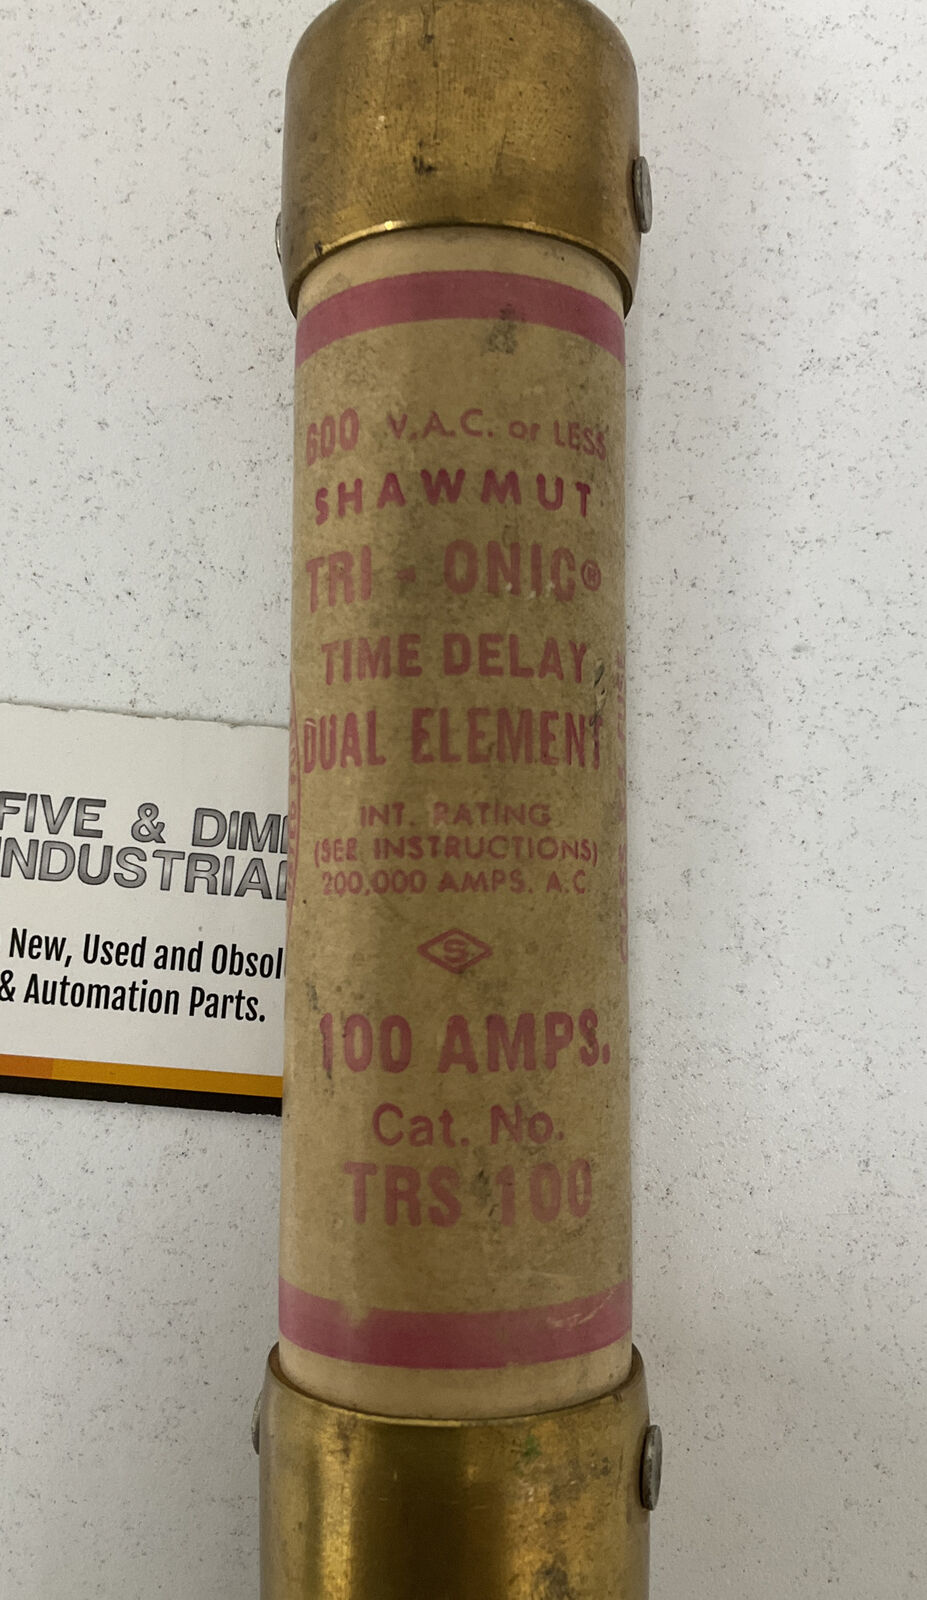 Gould Shawmut Tri-onic Time Delay Dual-Element Fuse TRS100 (CL217)